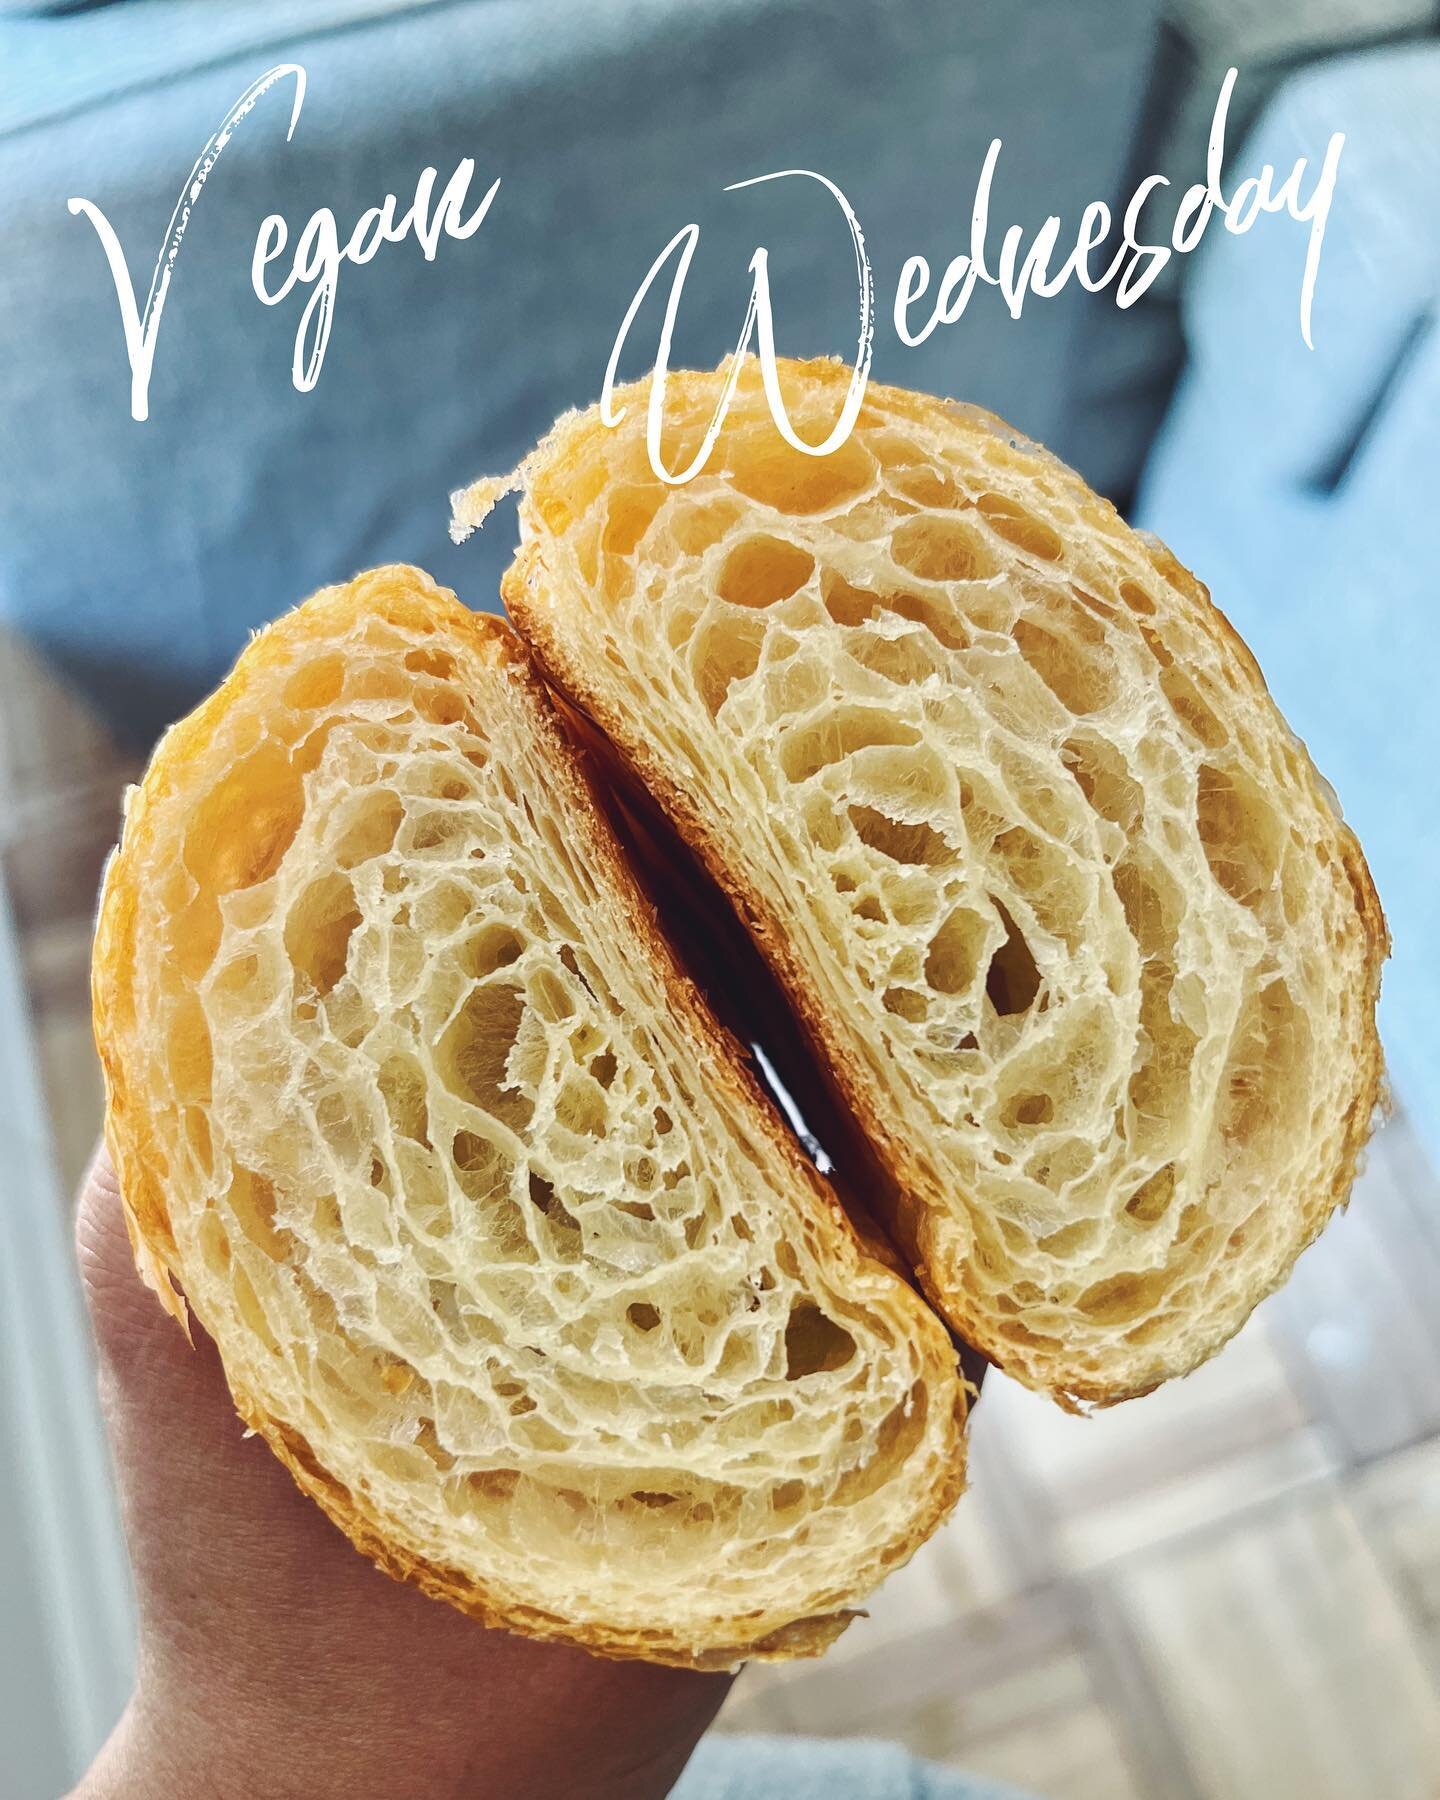 We&rsquo;ve been working on something special behind the scenes and we&rsquo;re so excited to share it with ya&rsquo;ll today - a line-up of vegan croissants, pastries, and vegan breakfast &amp; lunch offerings!!! 🌱🥐🌱 I know vegan laminated goodie